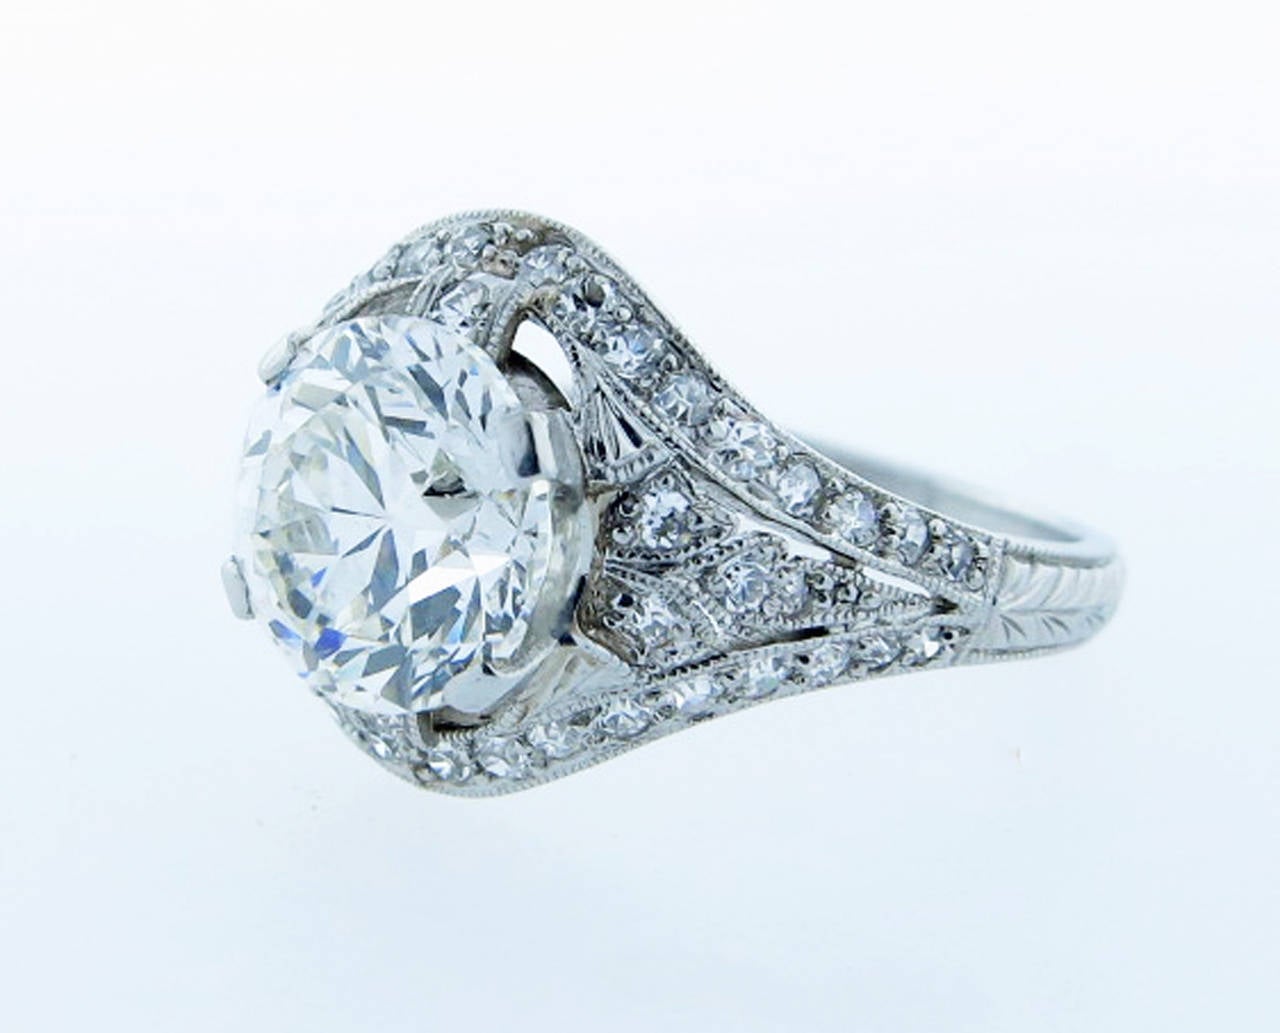 Scintillating handmade platinum mount diamond ring by the renowned American jeweler Marcus. The center is prong set with a round  European cut diamond measuring approx 7.8 mm. x 5.5 mm. weighing 2.32 cts. The diamond grades VS clarity and faces up 